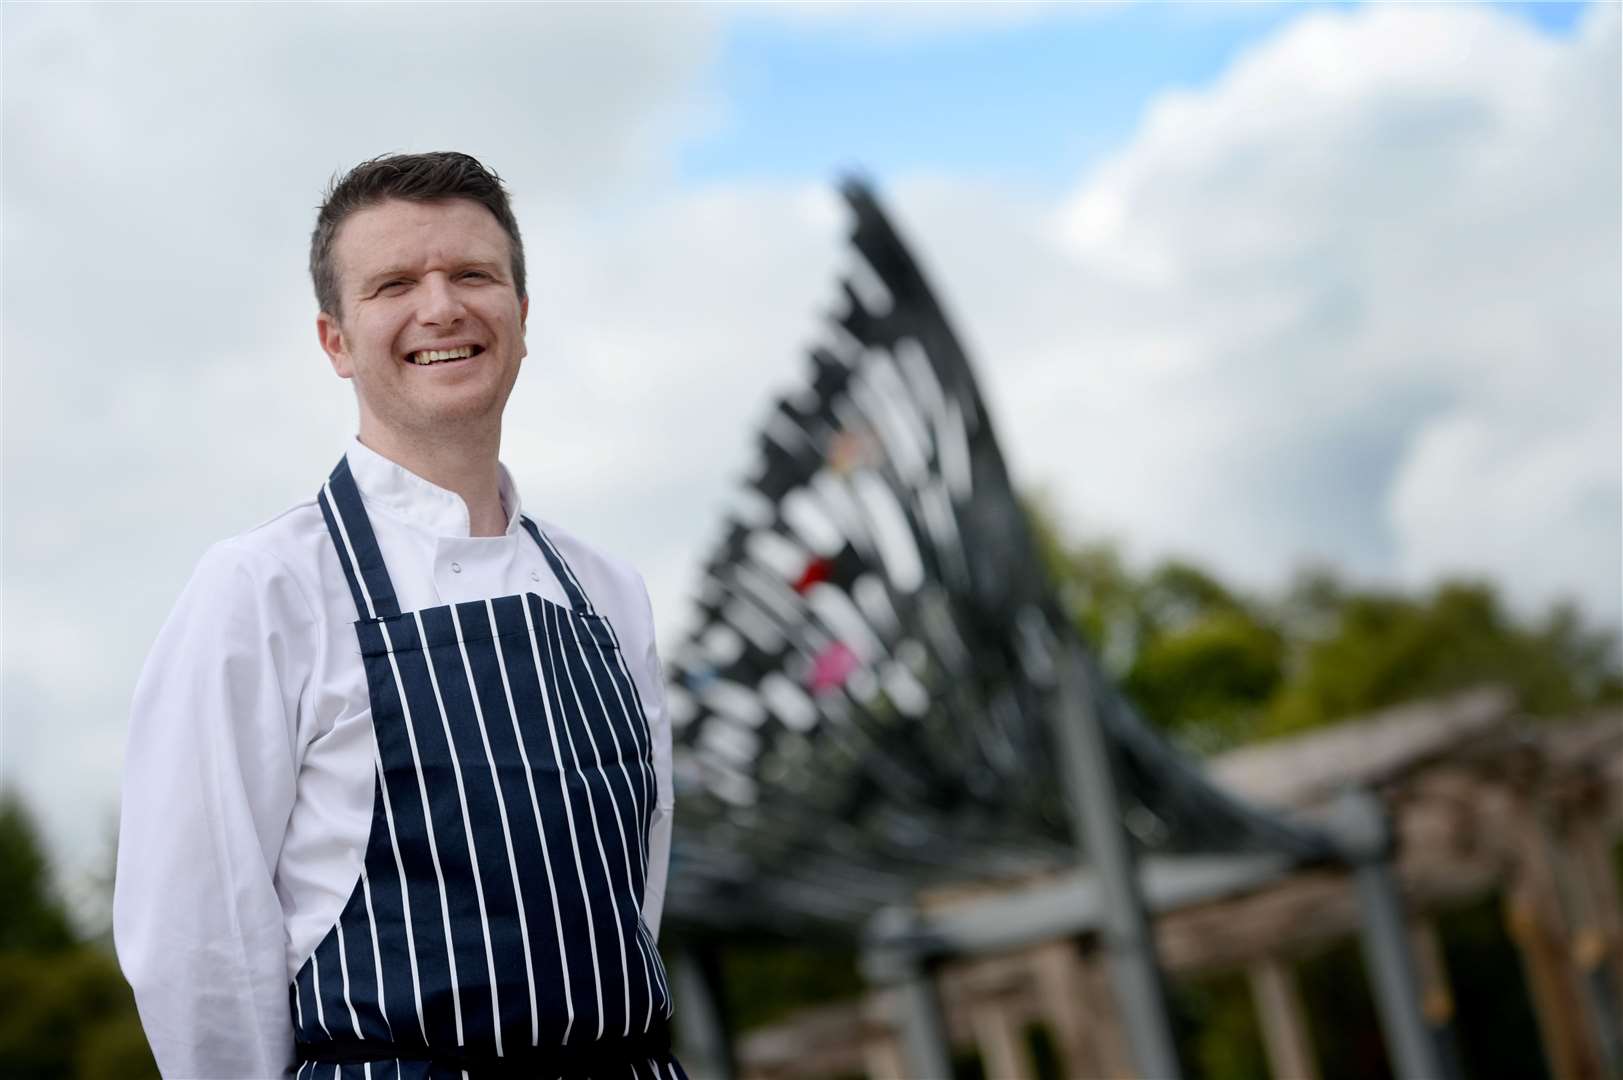 Graham Rooney is showcasing produce from his doorstep at the Royal Highland Show demonstration.